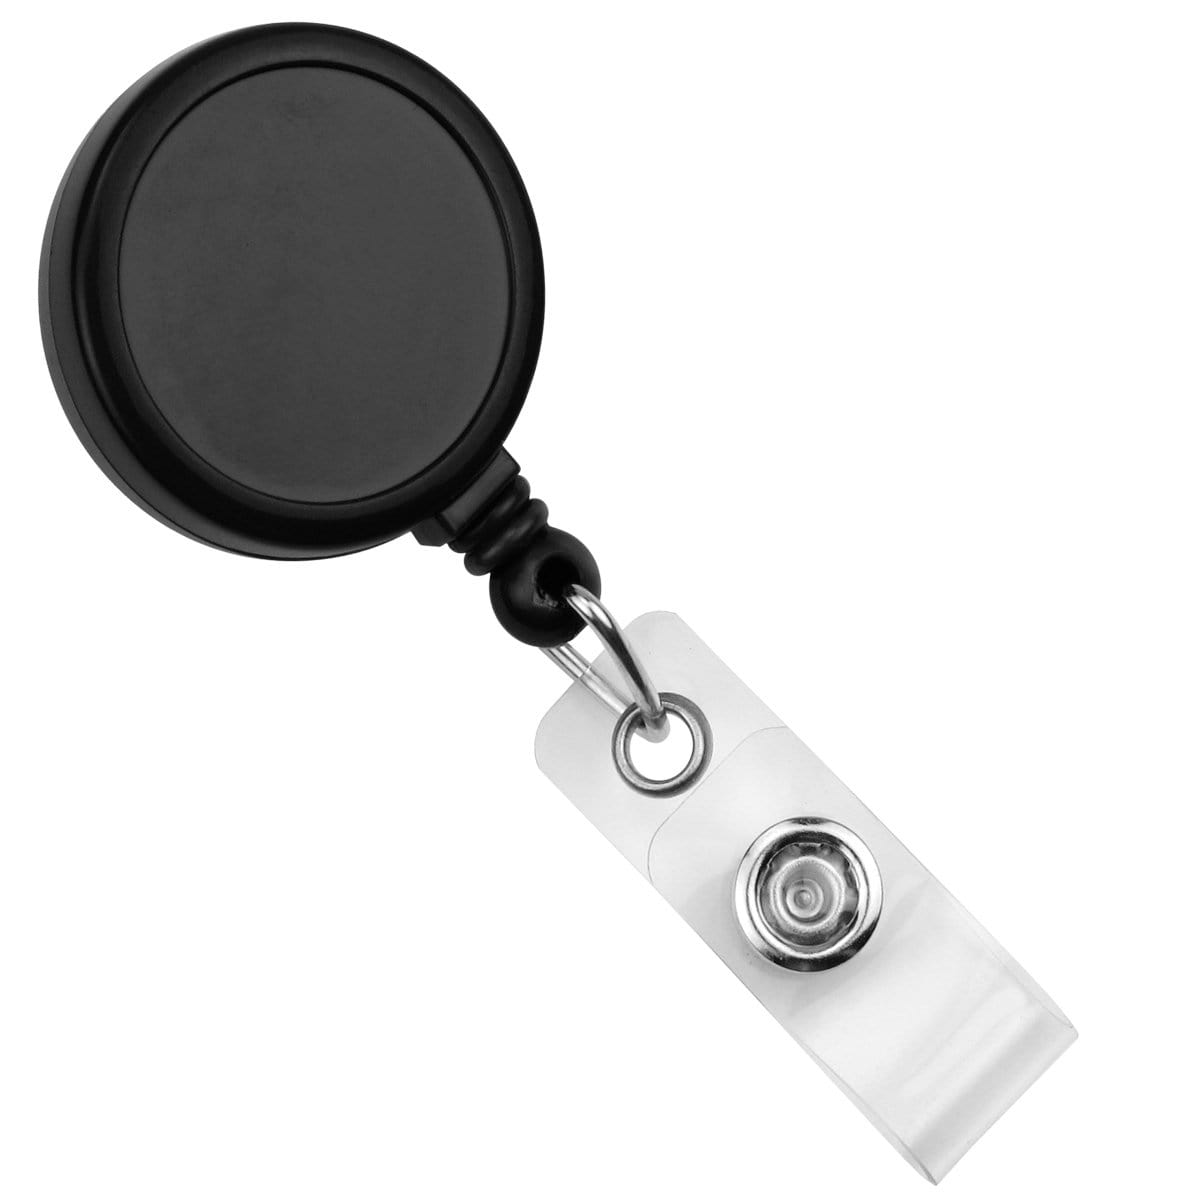 Max Label Badge Reel with 1 inch Smooth Face and Swivel Spring Clip (909-I)